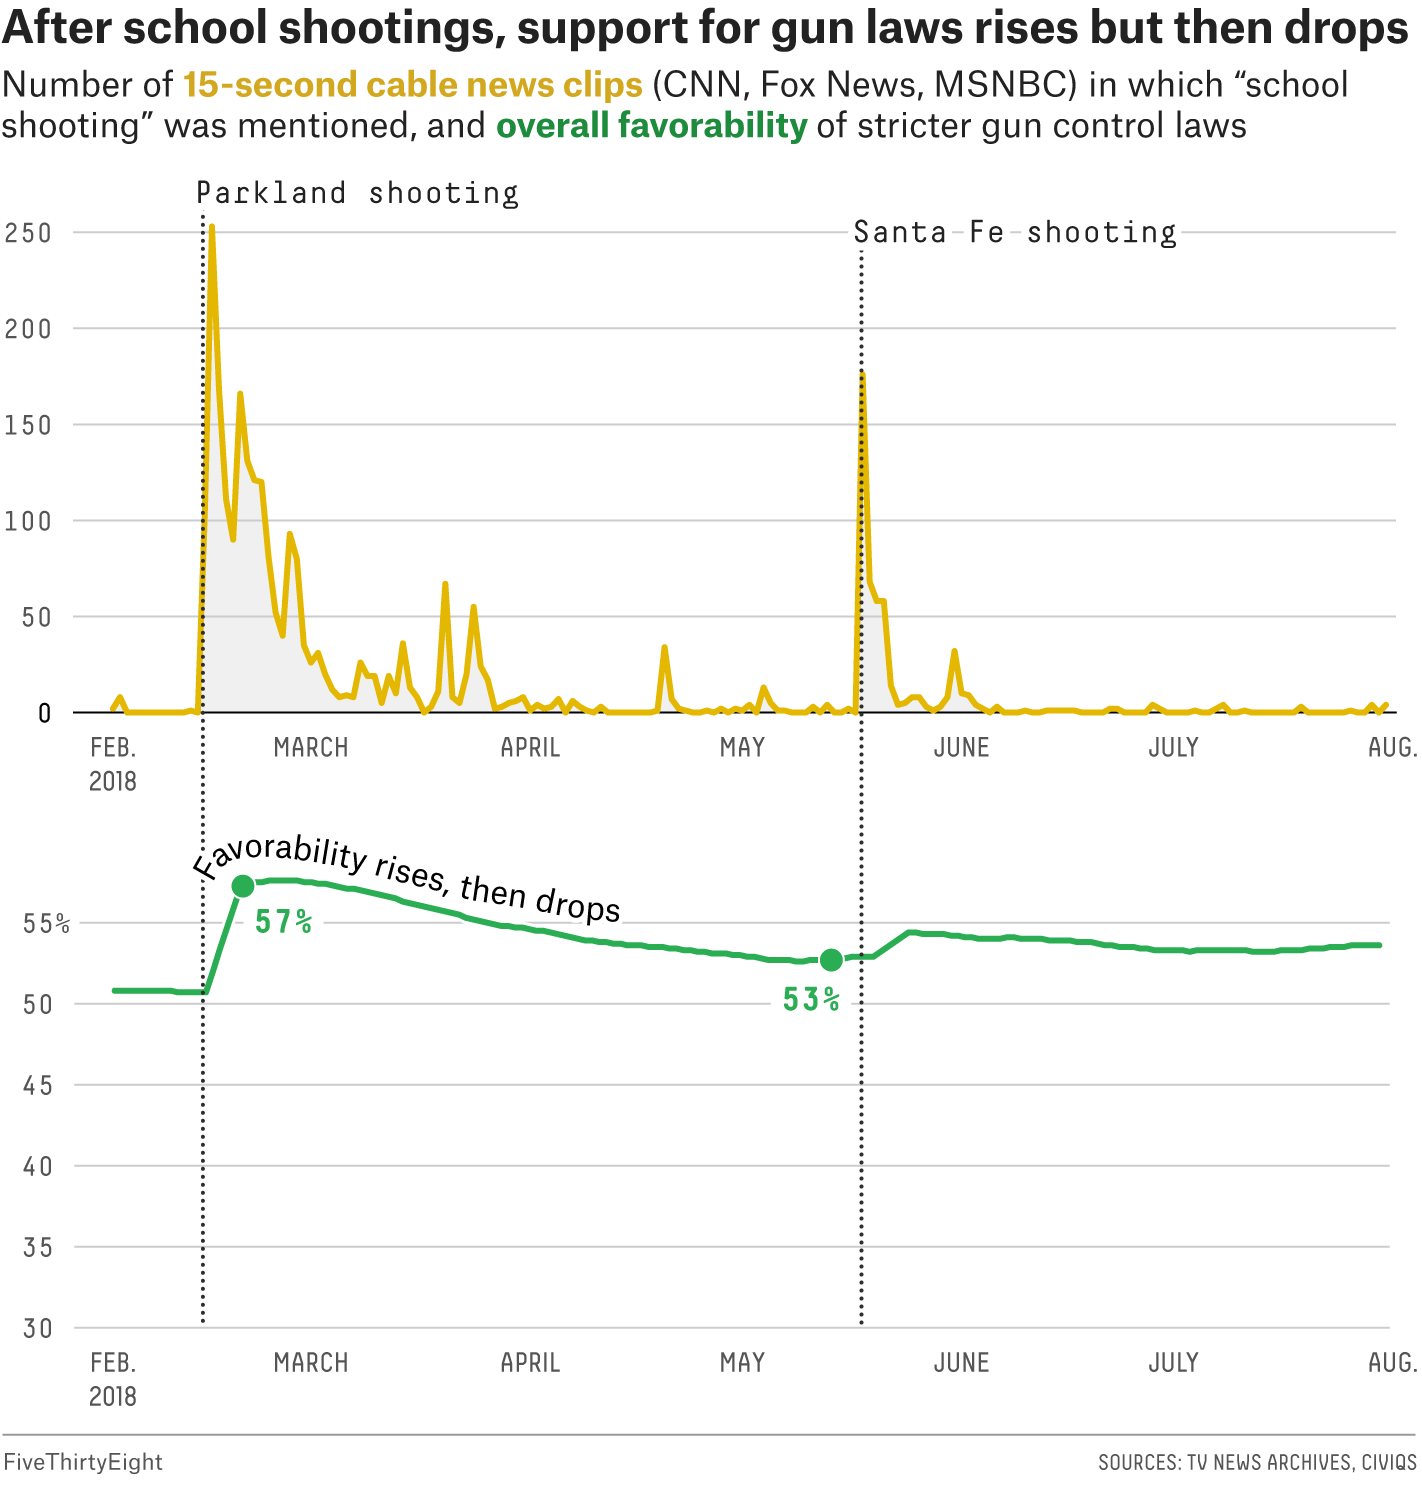 Two line charts showing how overall favorability of stricter gun control laws rises, then drops, and how the number of 15-second cable news clips mentioning “school shooting” also rises, and drops again, after a mass shooting.